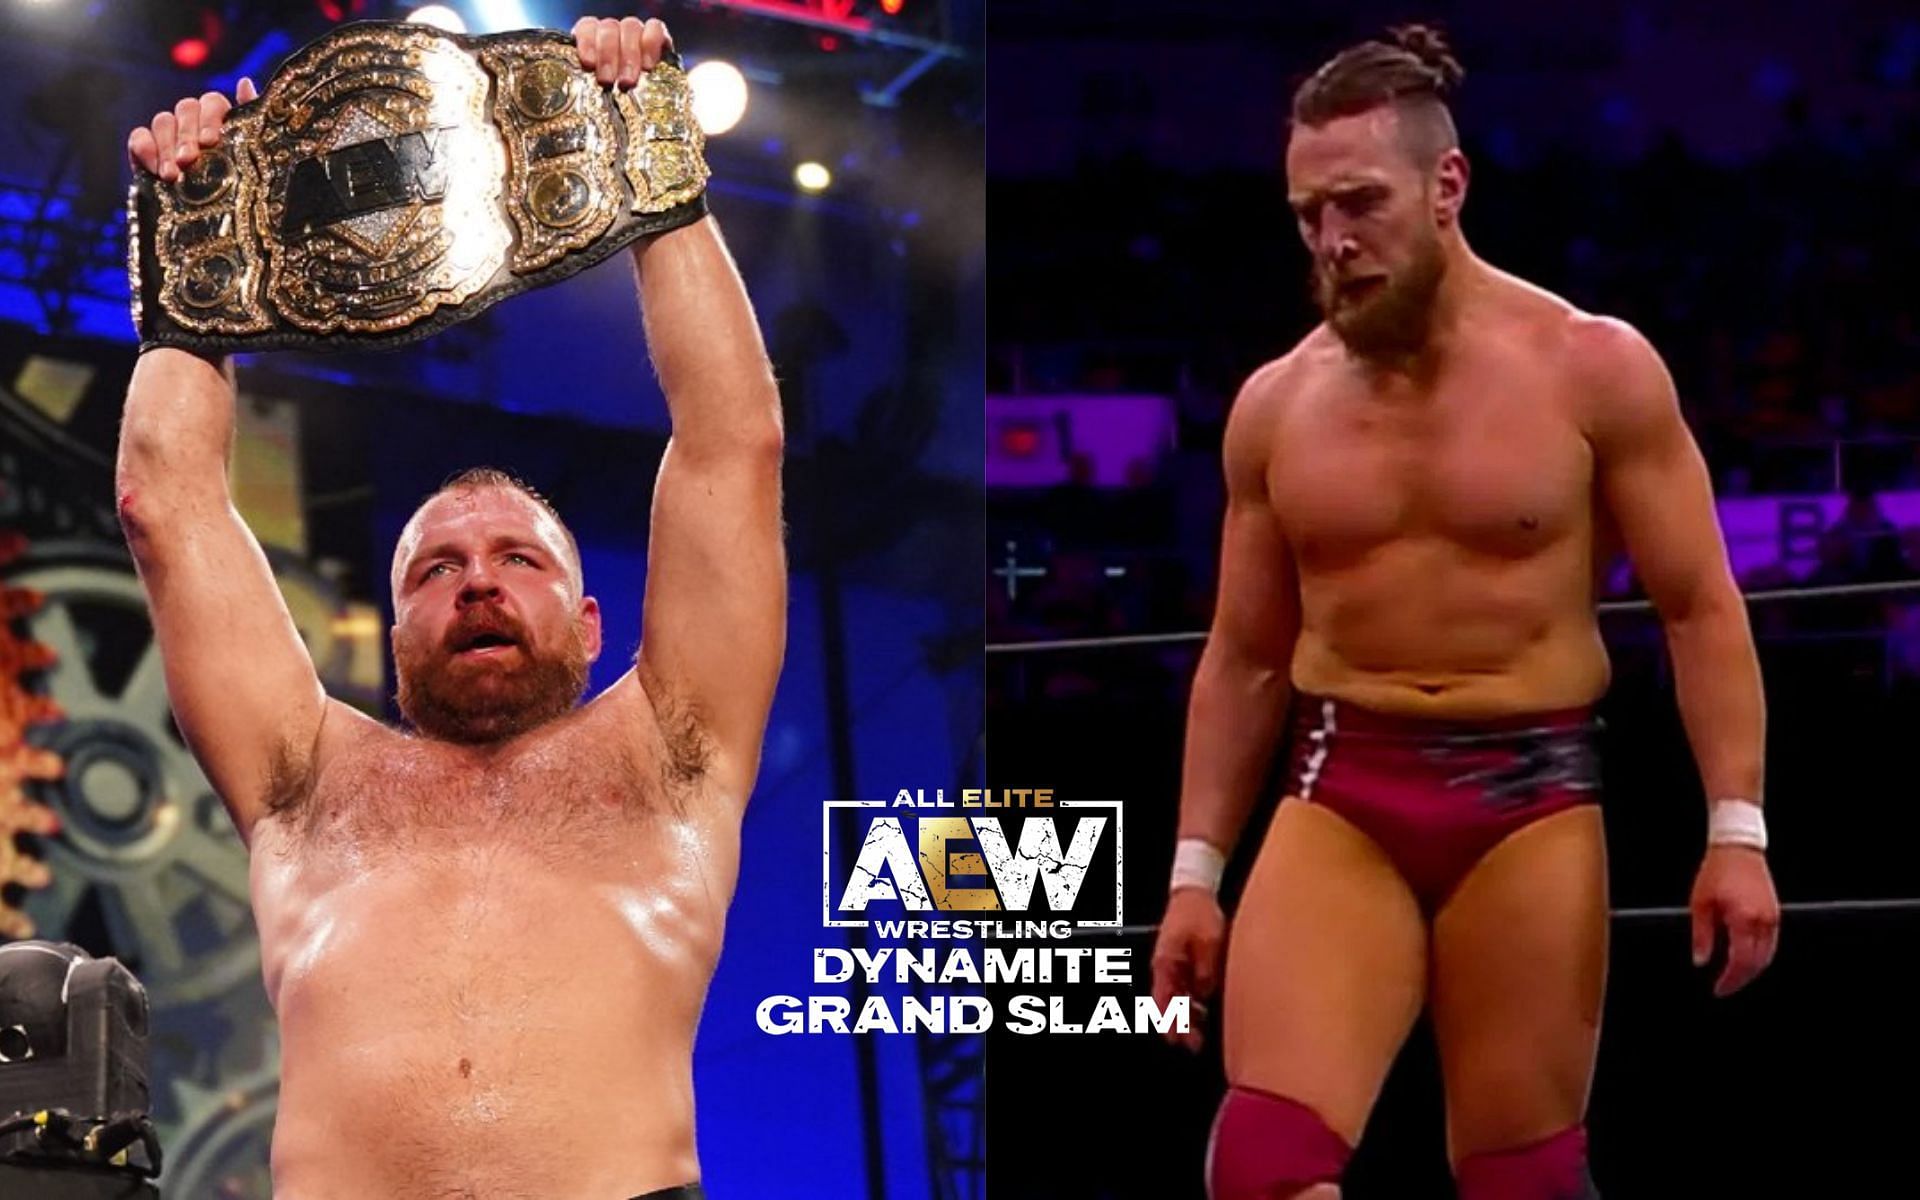 Jon Moxley and Bryan Danielson faced off for the AEW World Championship last week on Dynamite.